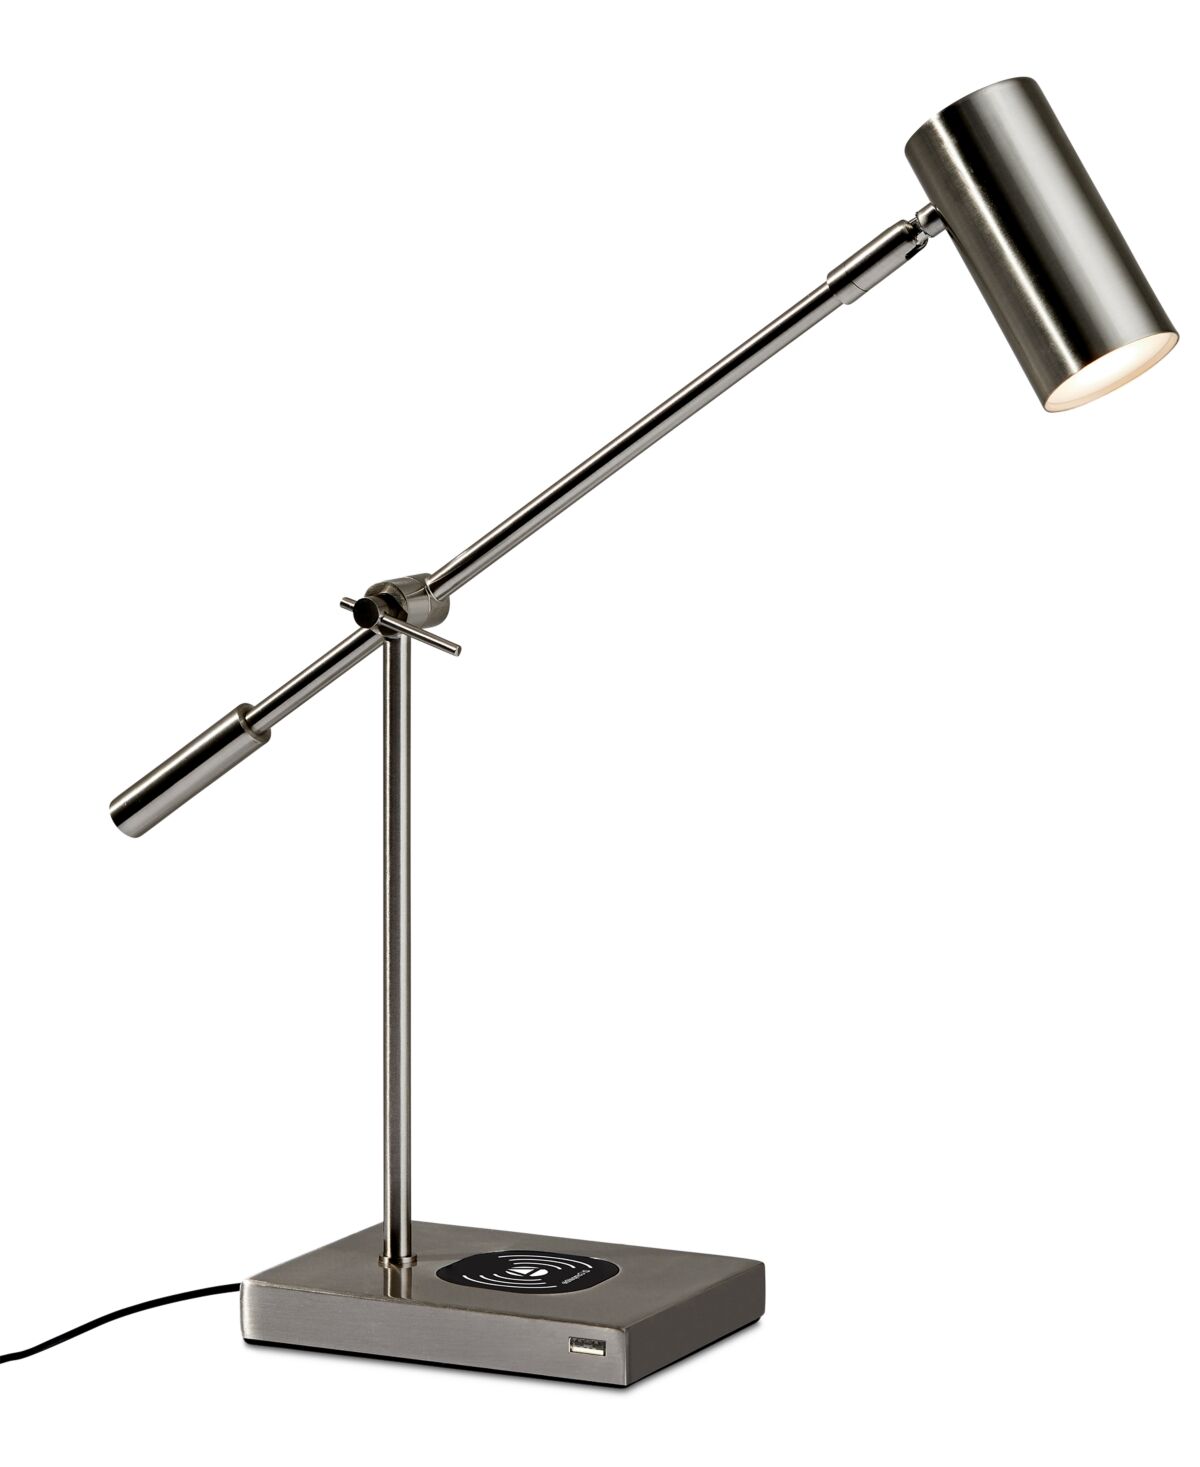 Adesso Collette Led Desk Lamp with Wireless Air Charger & Usb Port - Brushed Steel